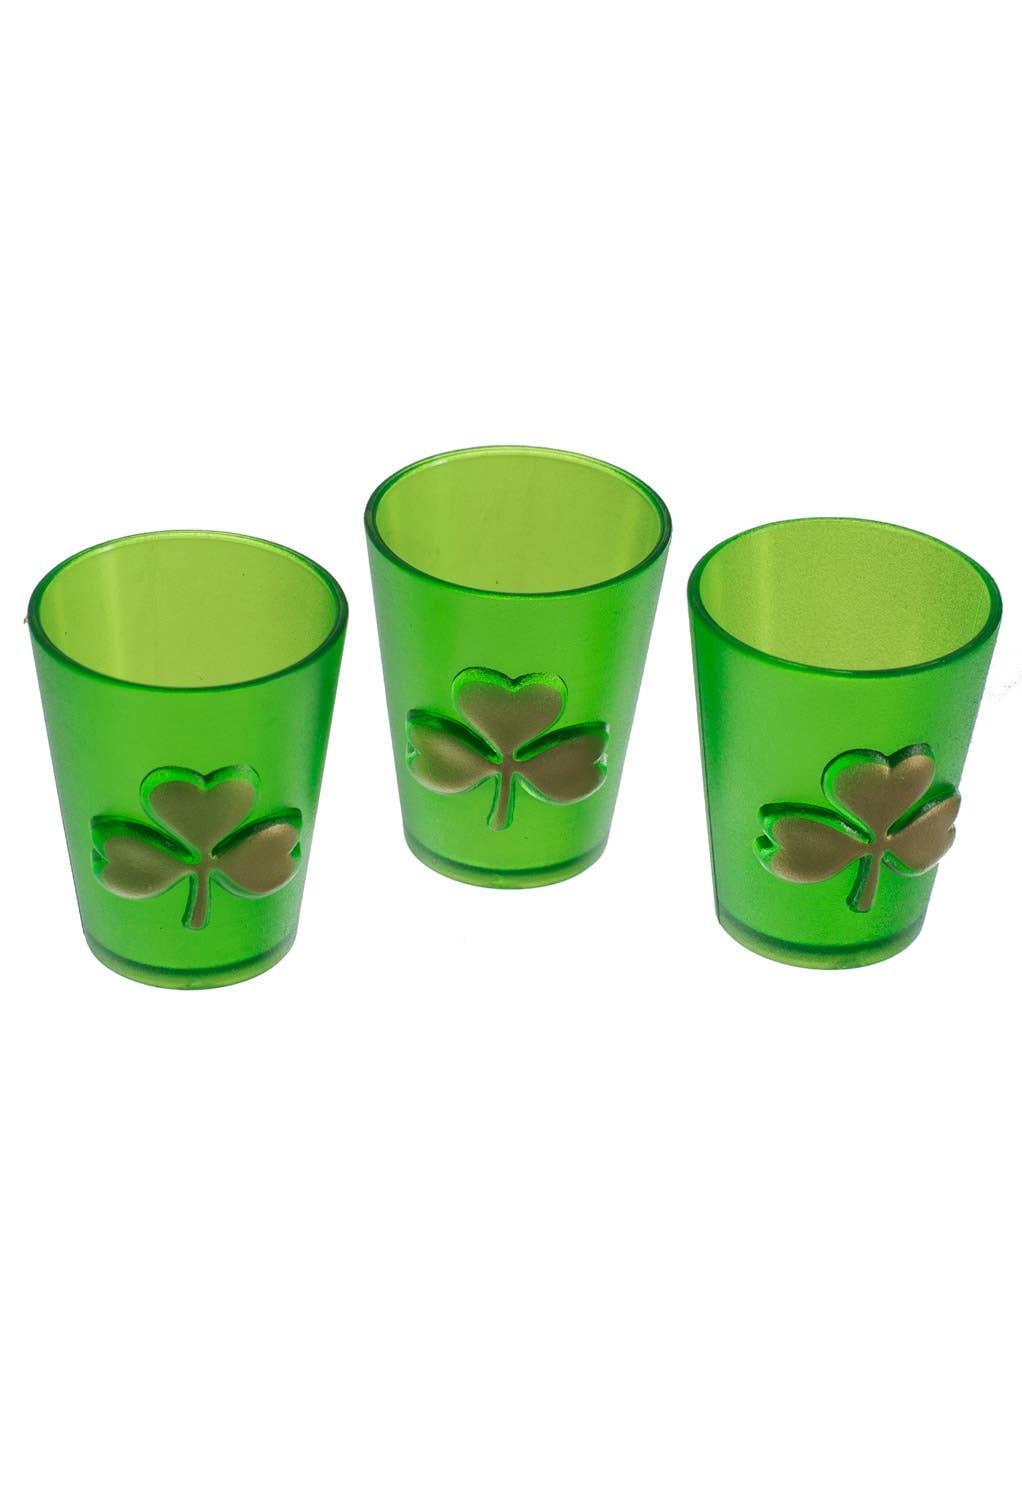 St Pats Day Shot Glasses Costume Accessory Set of 3 View 1